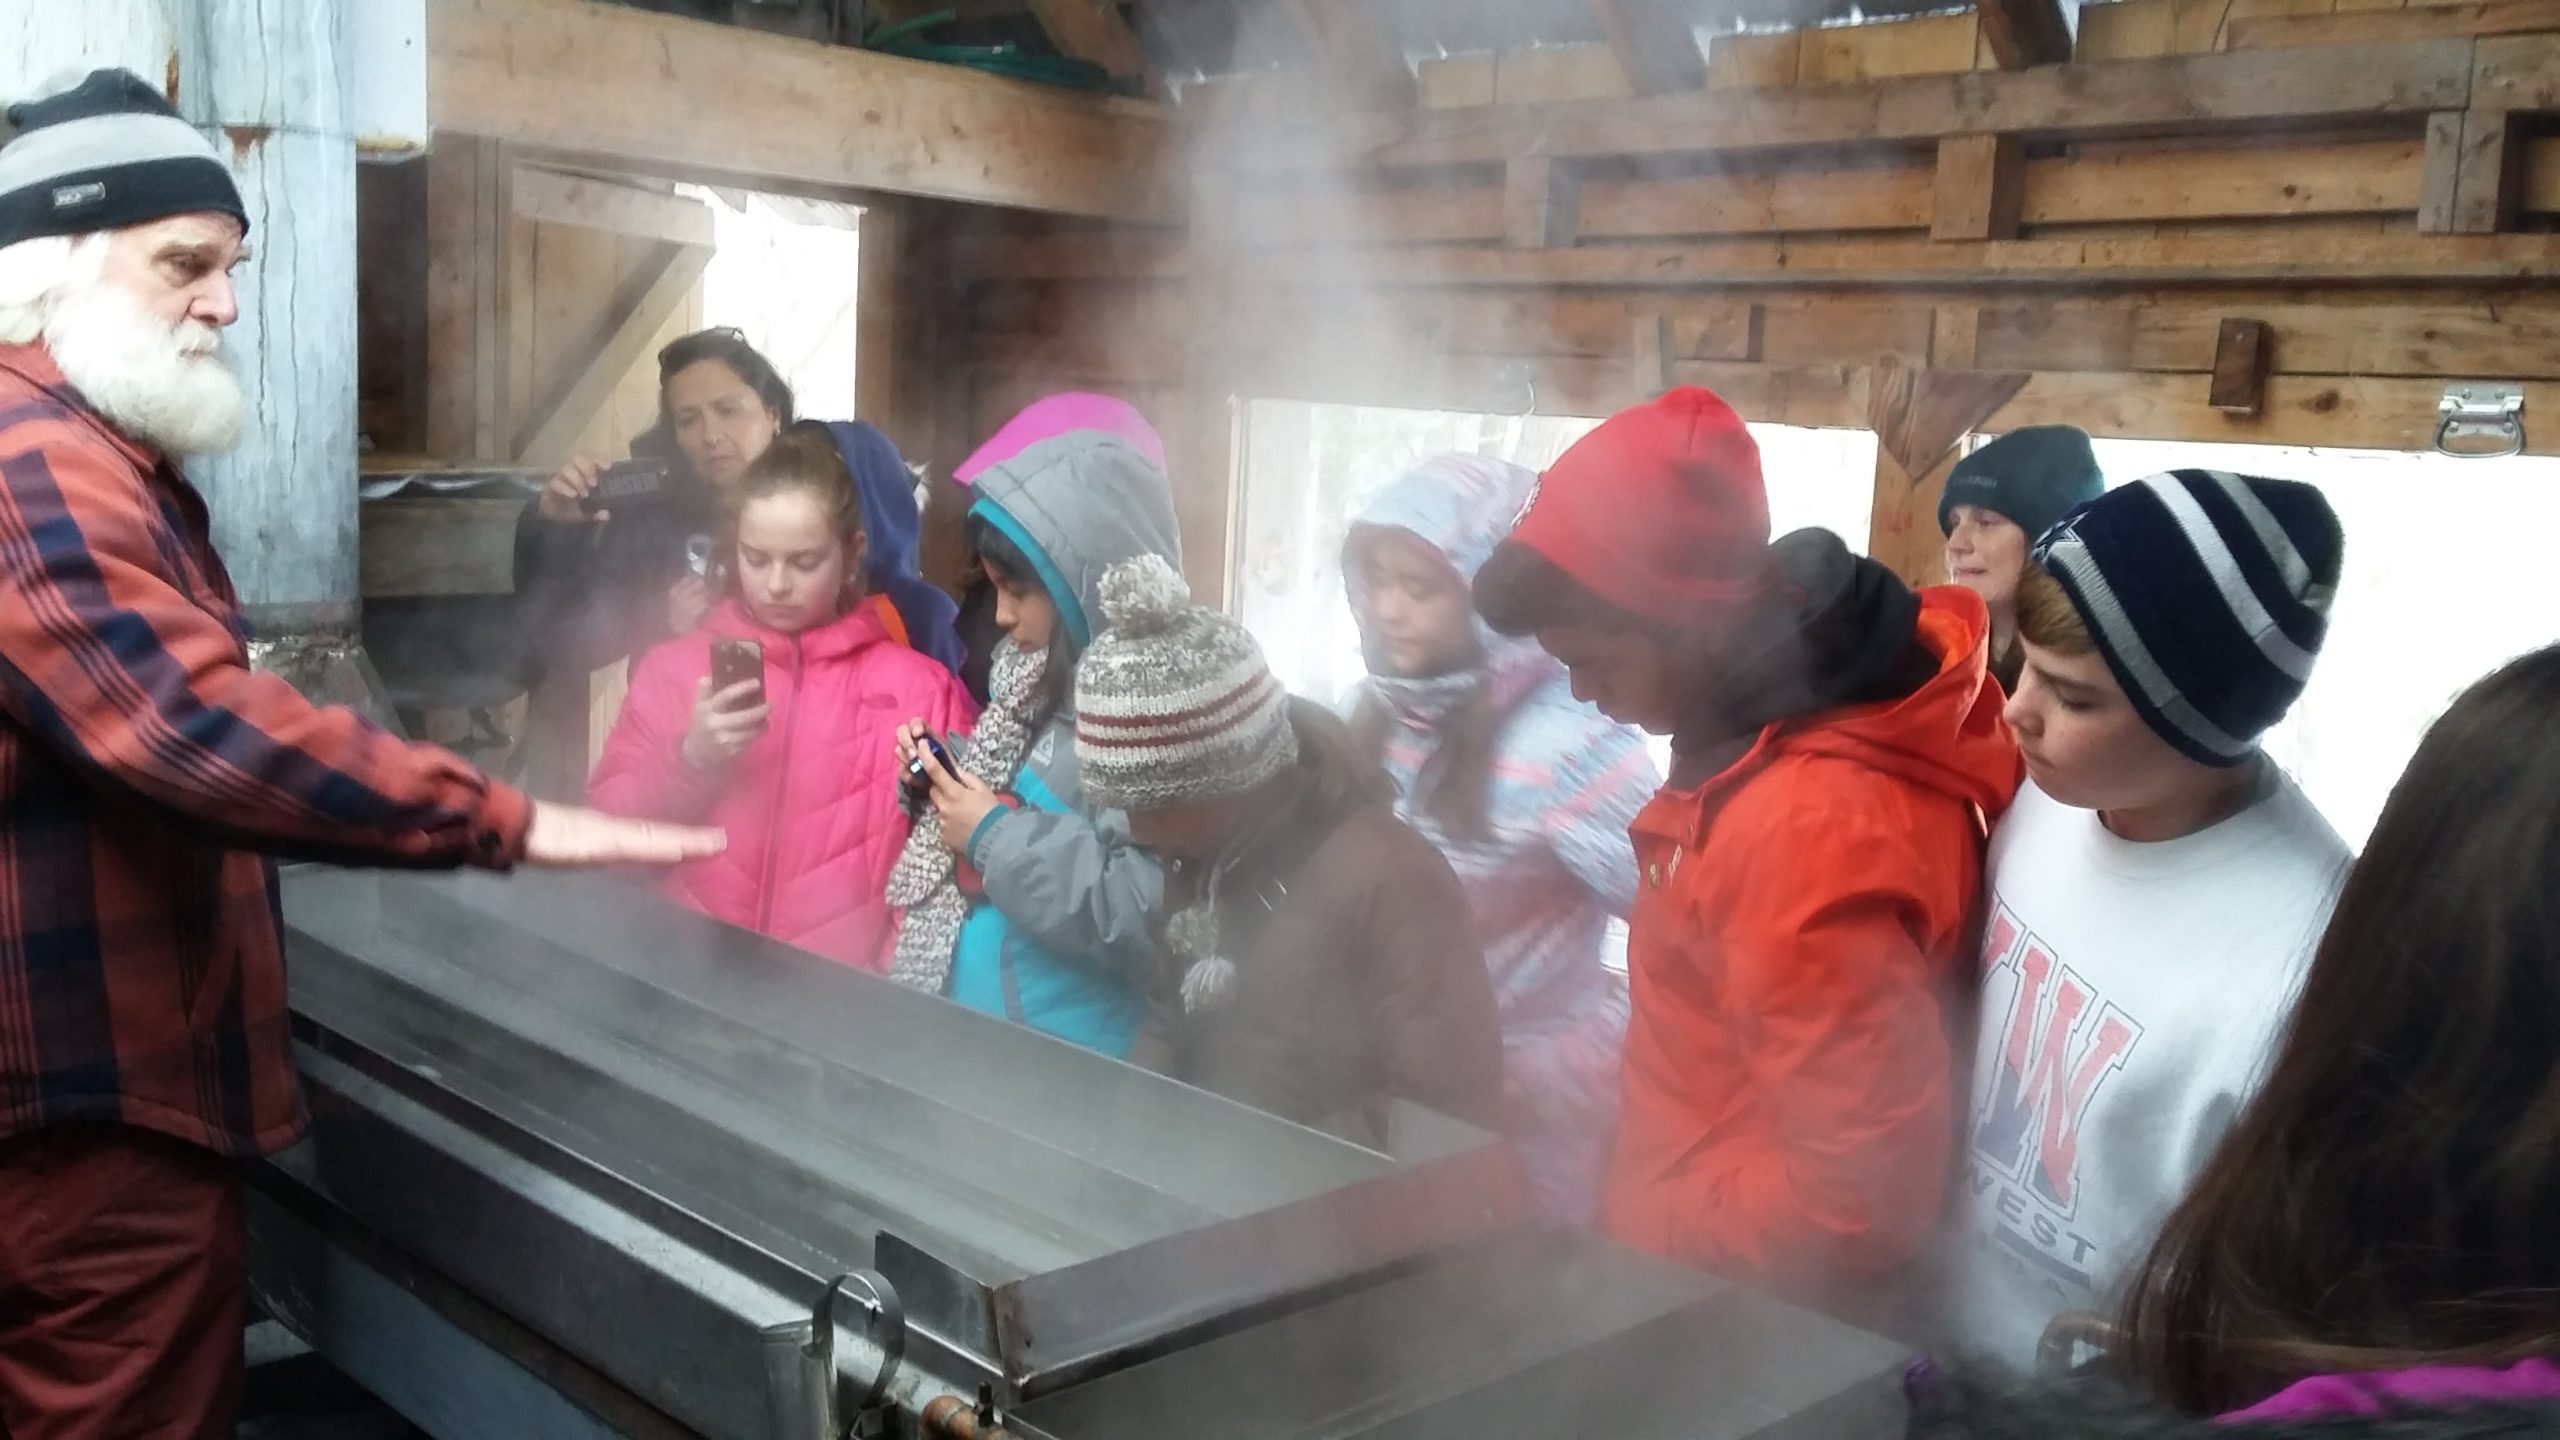 A volunteer shows guests how to work a syrup evaporator